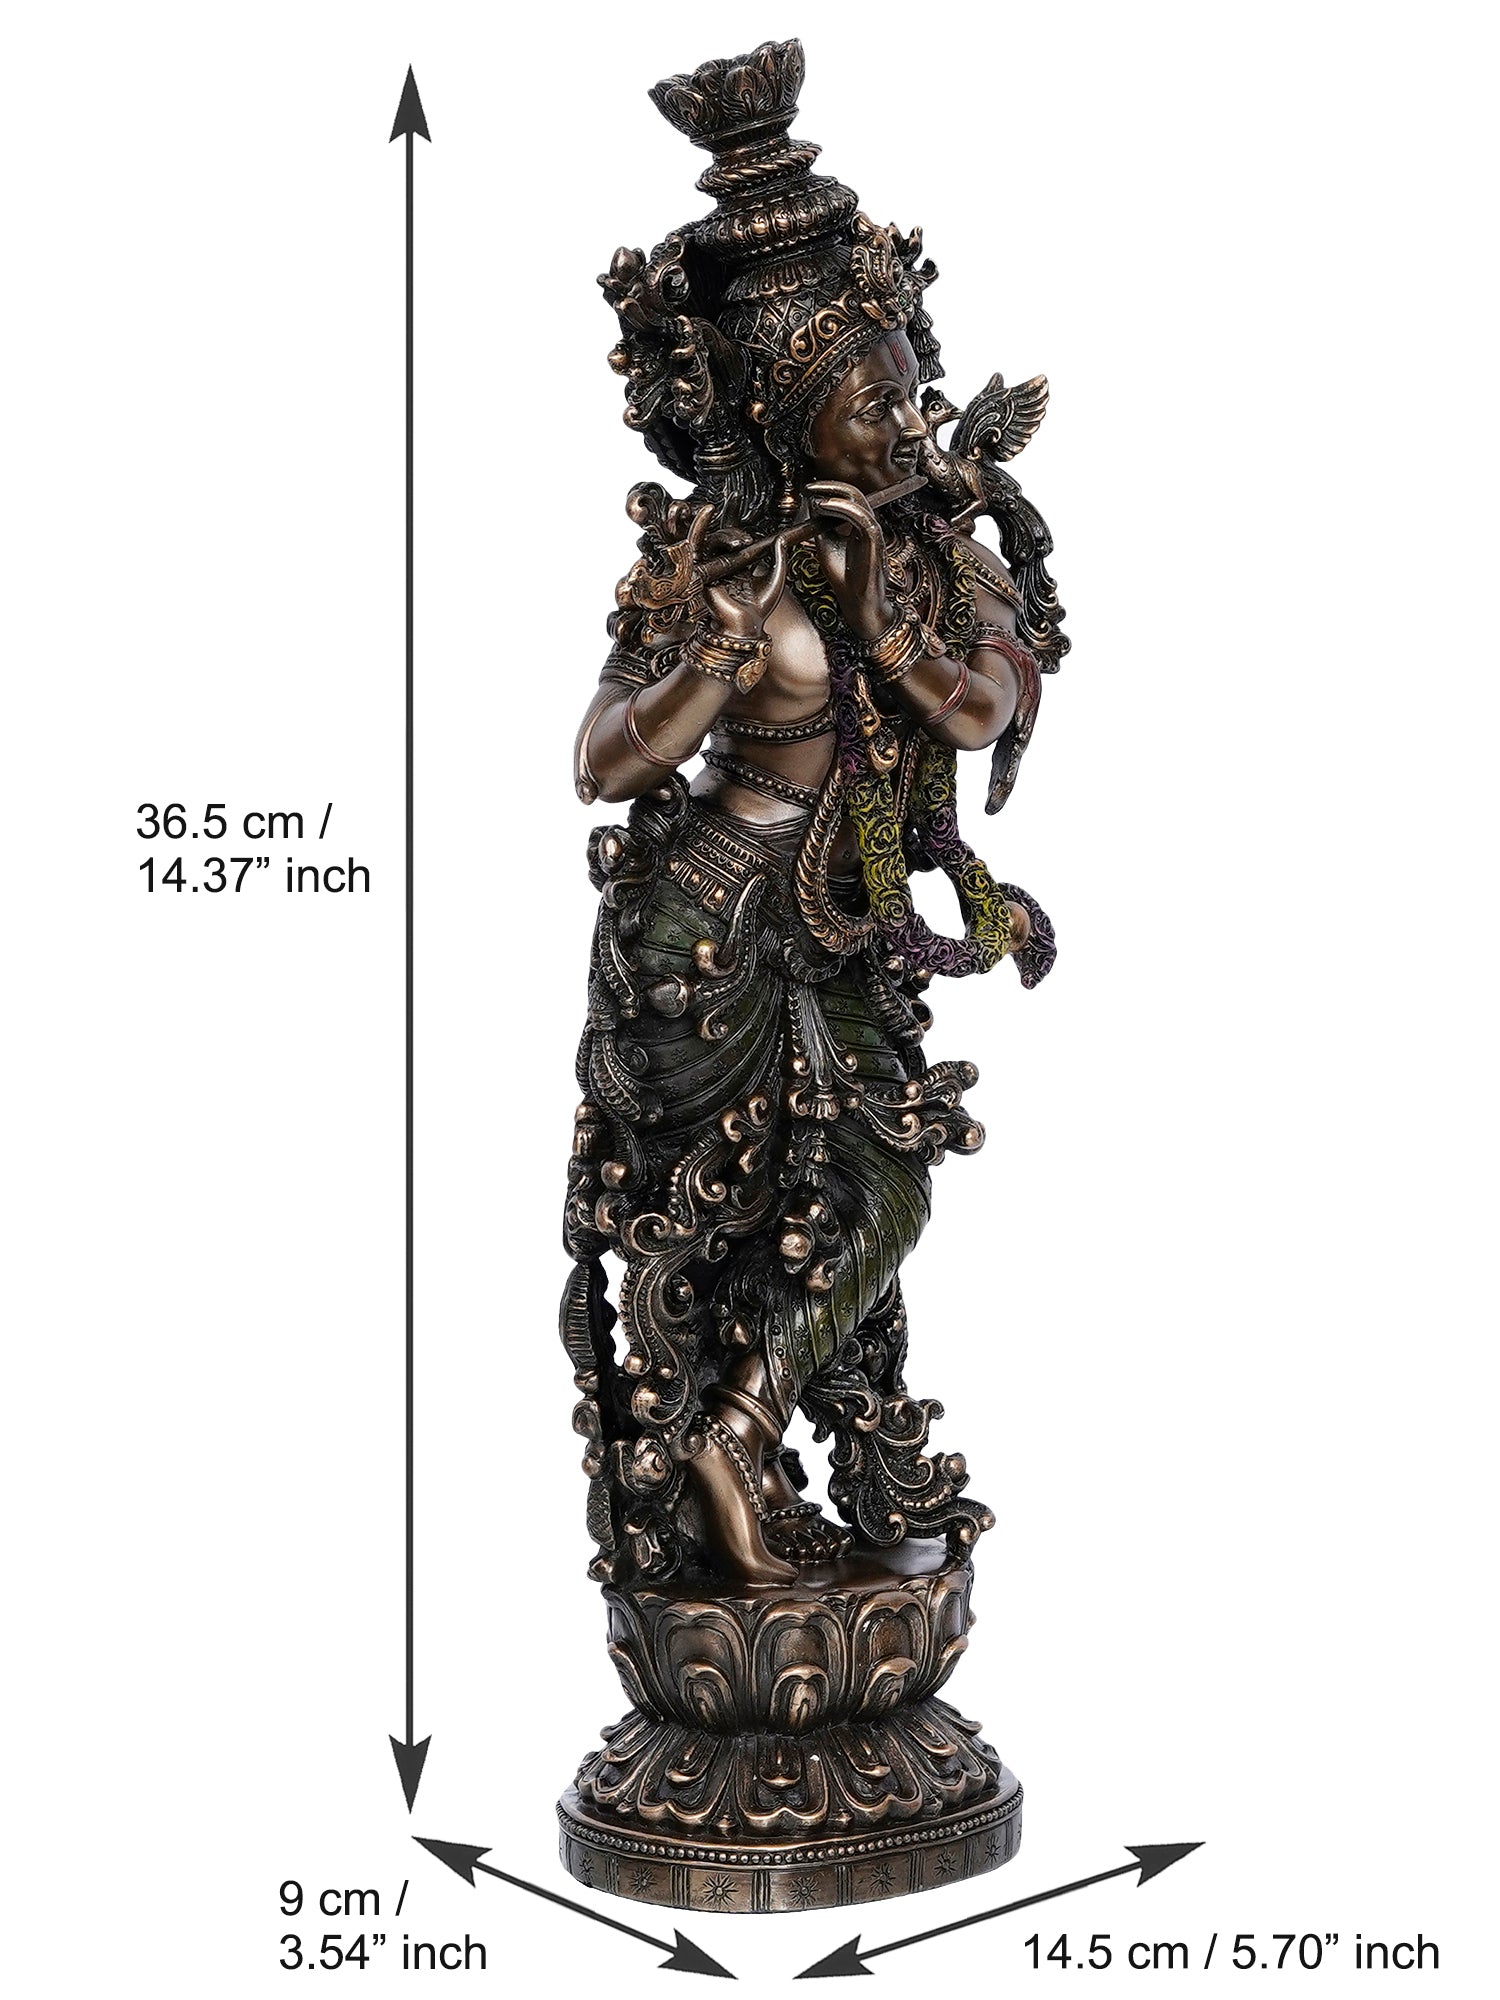 Brown Polyresin and Bronze Decorative Ethnic Carved Dancing Lord Krishna Playing Flute Figurine 3